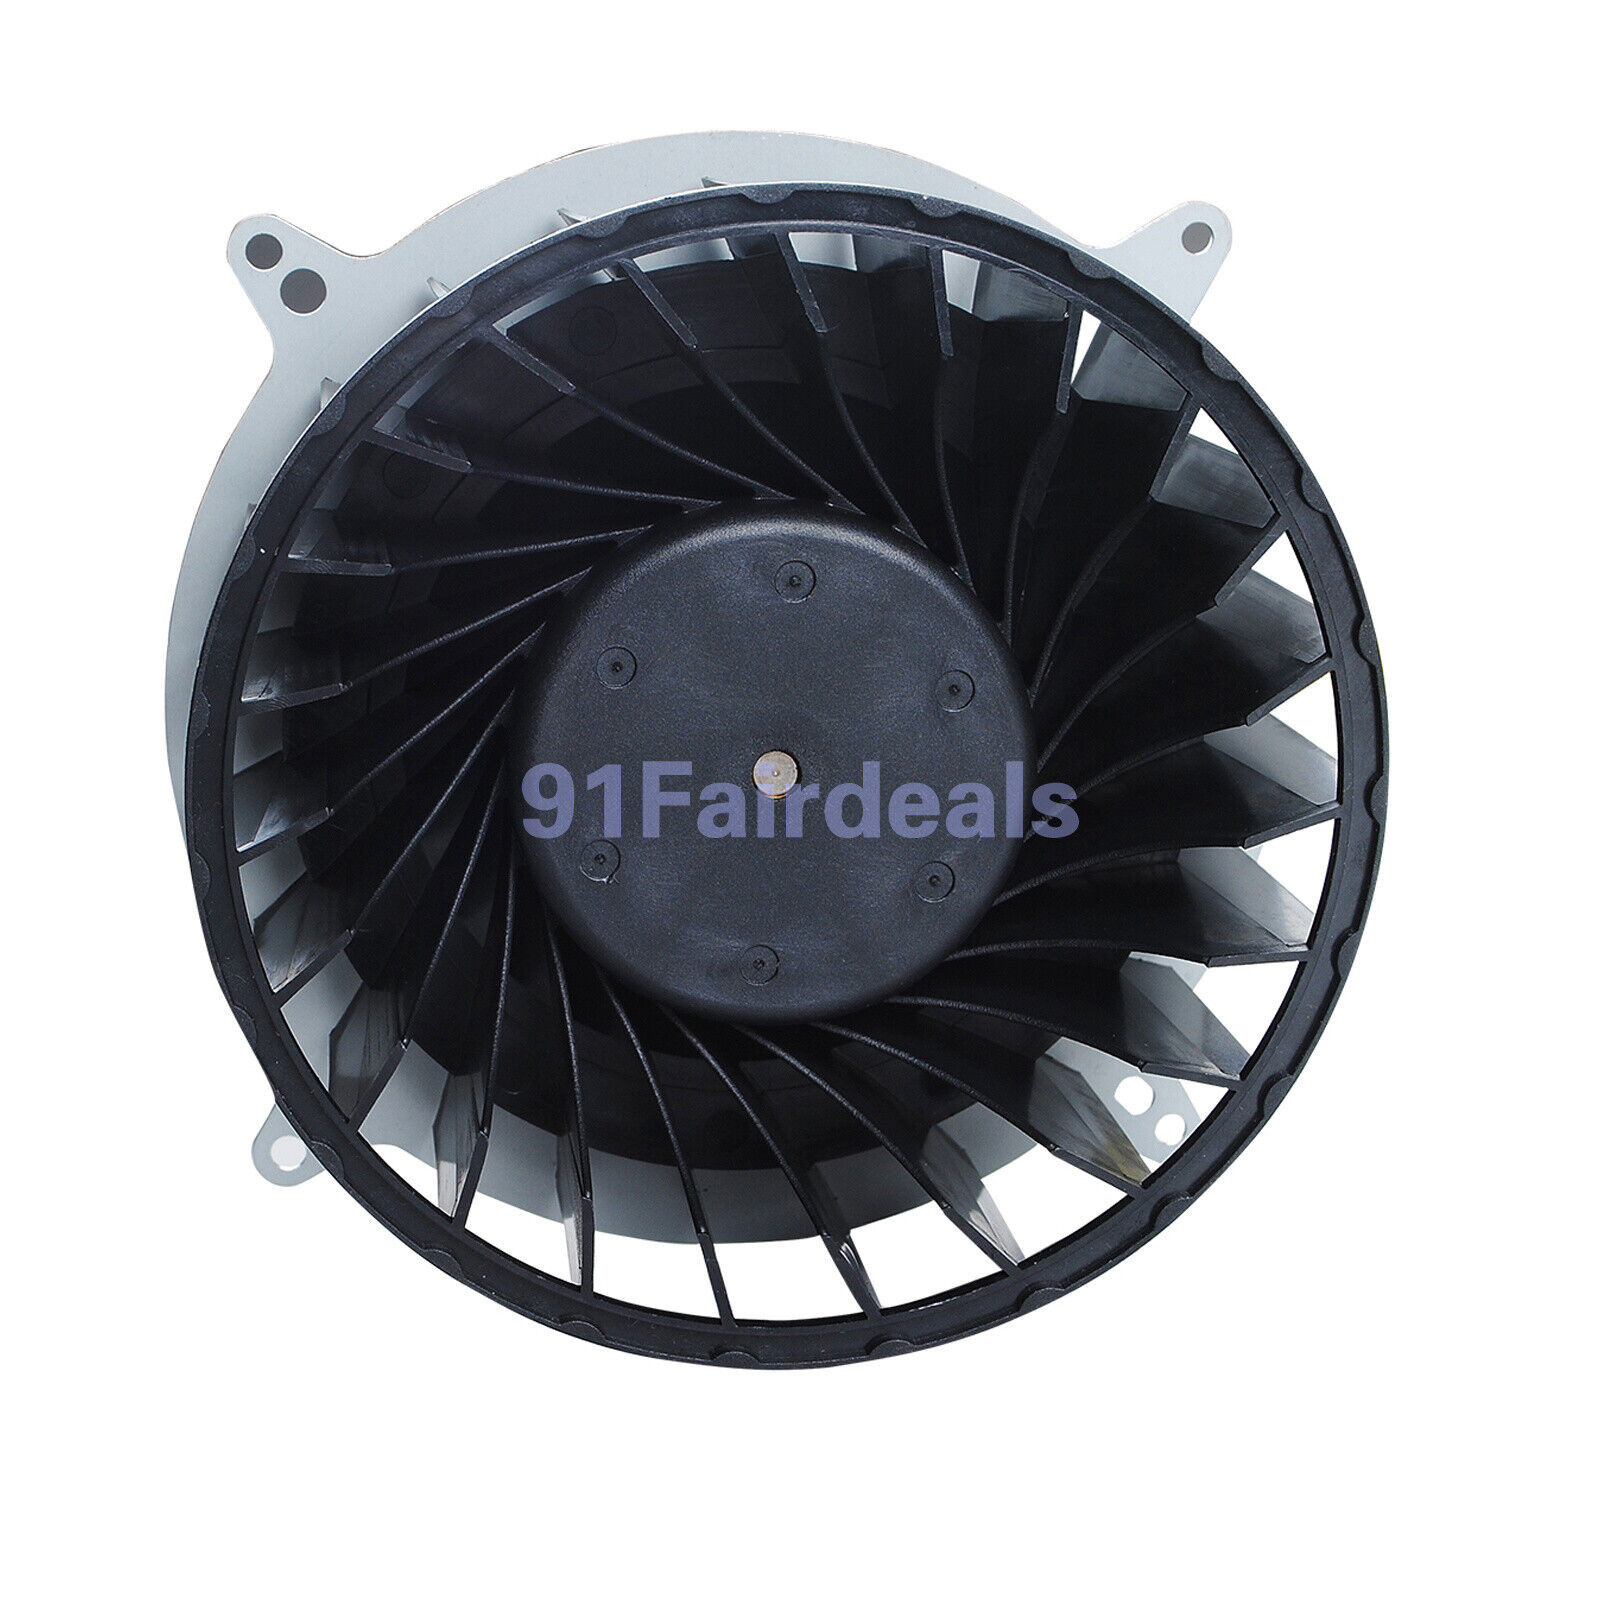 NEW Internal CPU Cooling Fan For SONY Playstation 5 PS5 23 blades Replacement